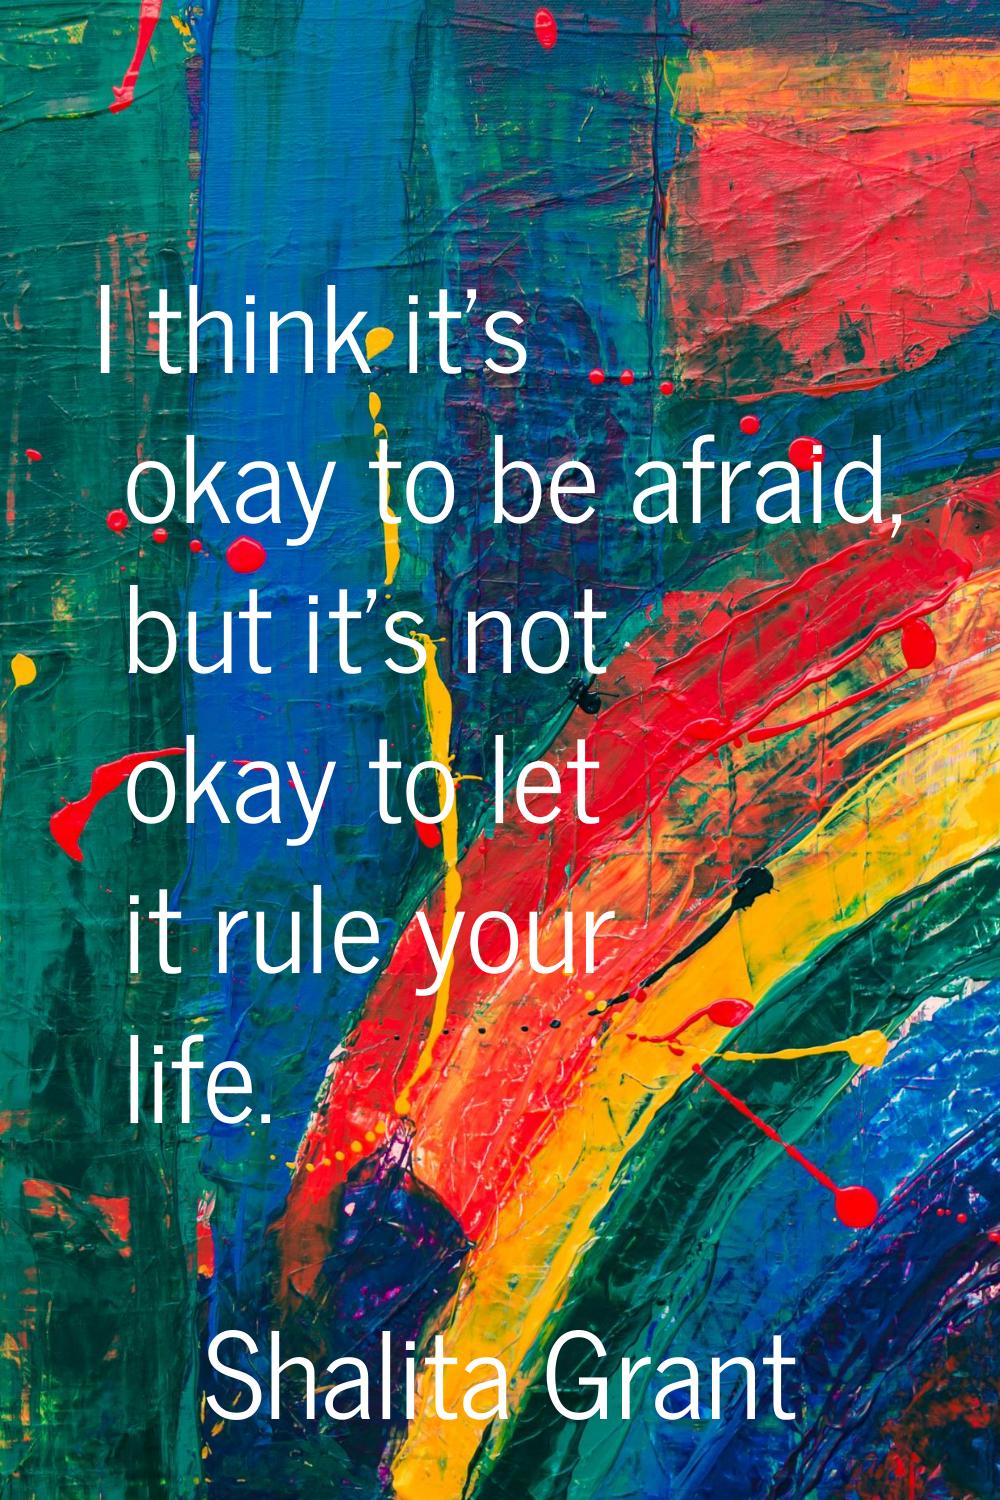 I think it's okay to be afraid, but it's not okay to let it rule your life.